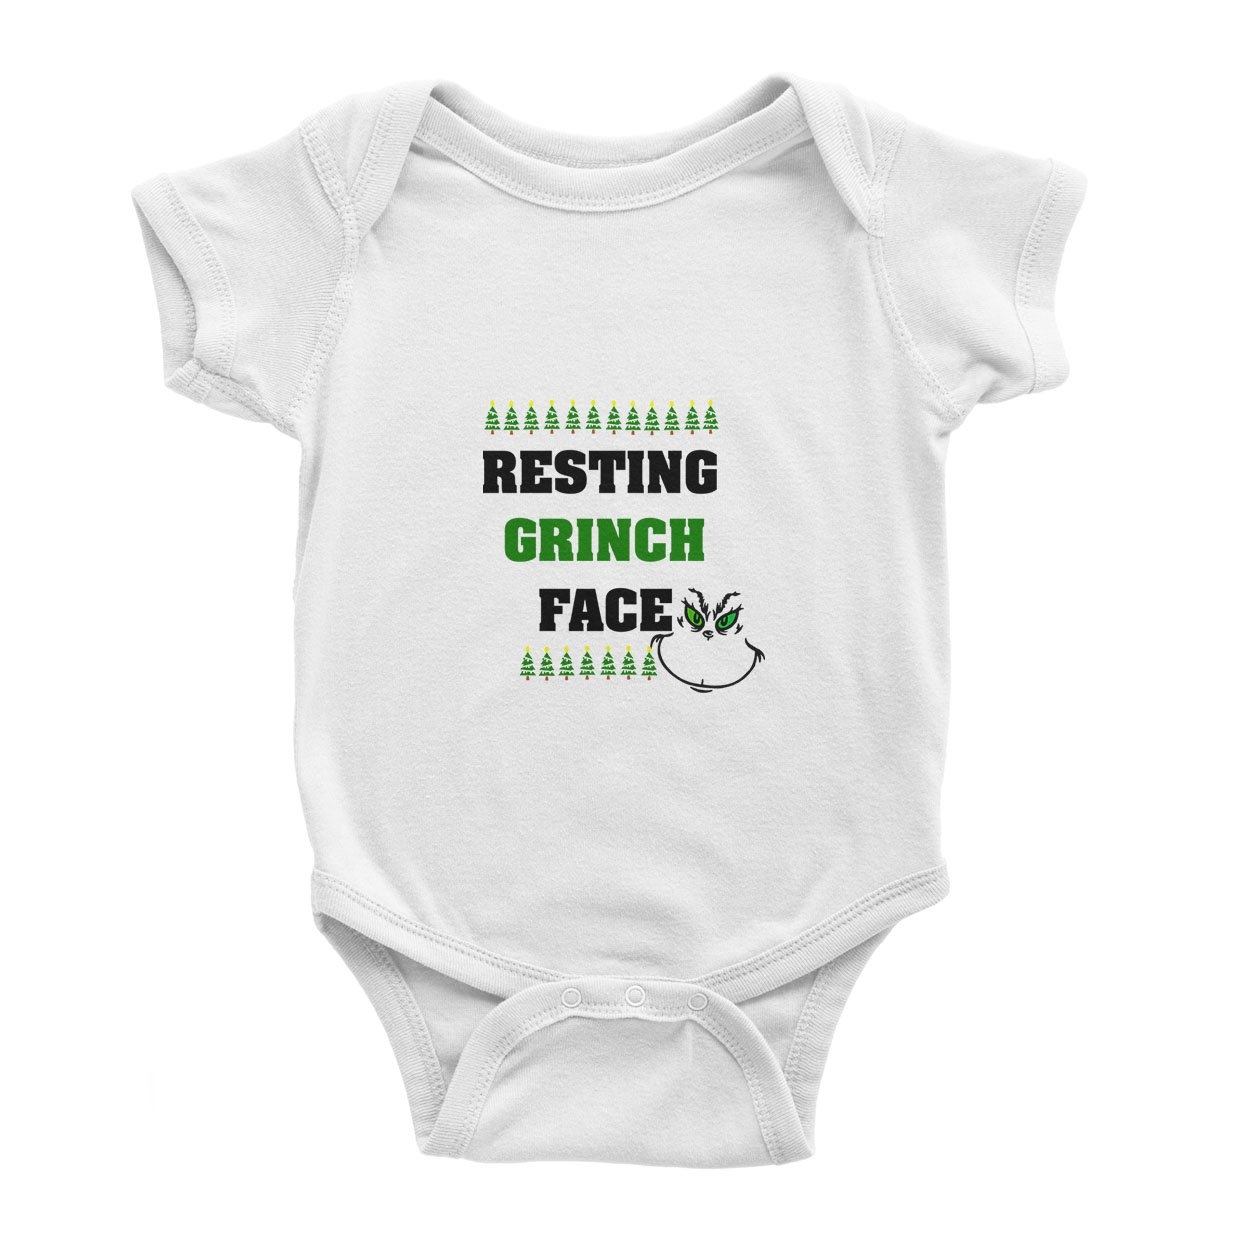 Resting Grinch Face – Baby Bodysuit, White – Ai Printing